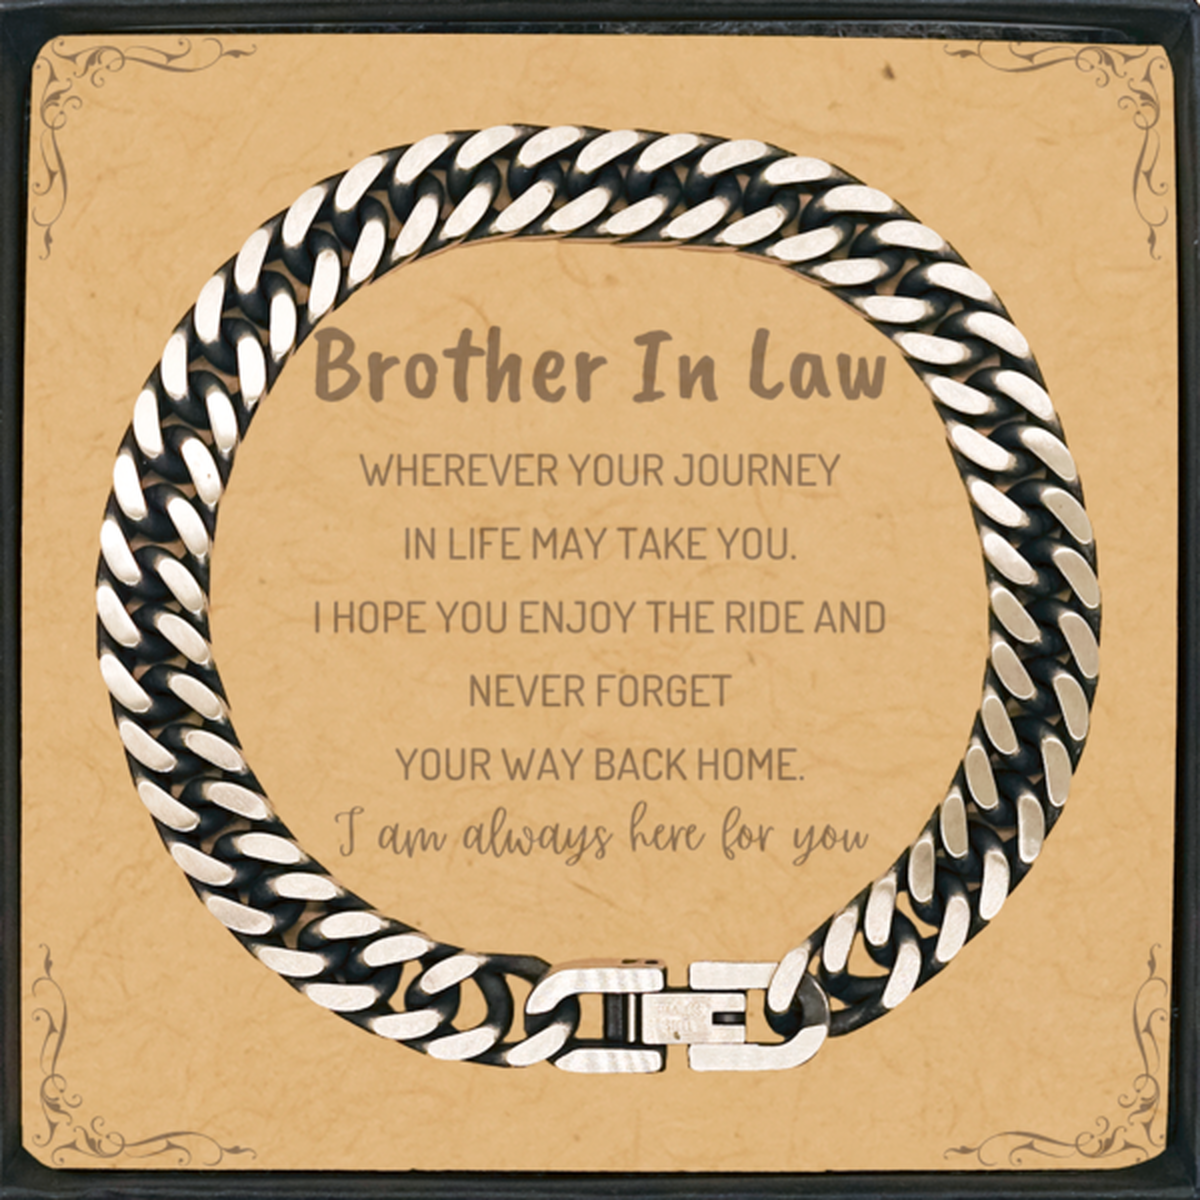 Brother In Law wherever your journey in life may take you, I am always here for you Brother In Law Cuban Link Chain Bracelet, Awesome Christmas Gifts For Brother In Law Message Card, Brother In Law Birthday Gifts for Men Women Family Loved One